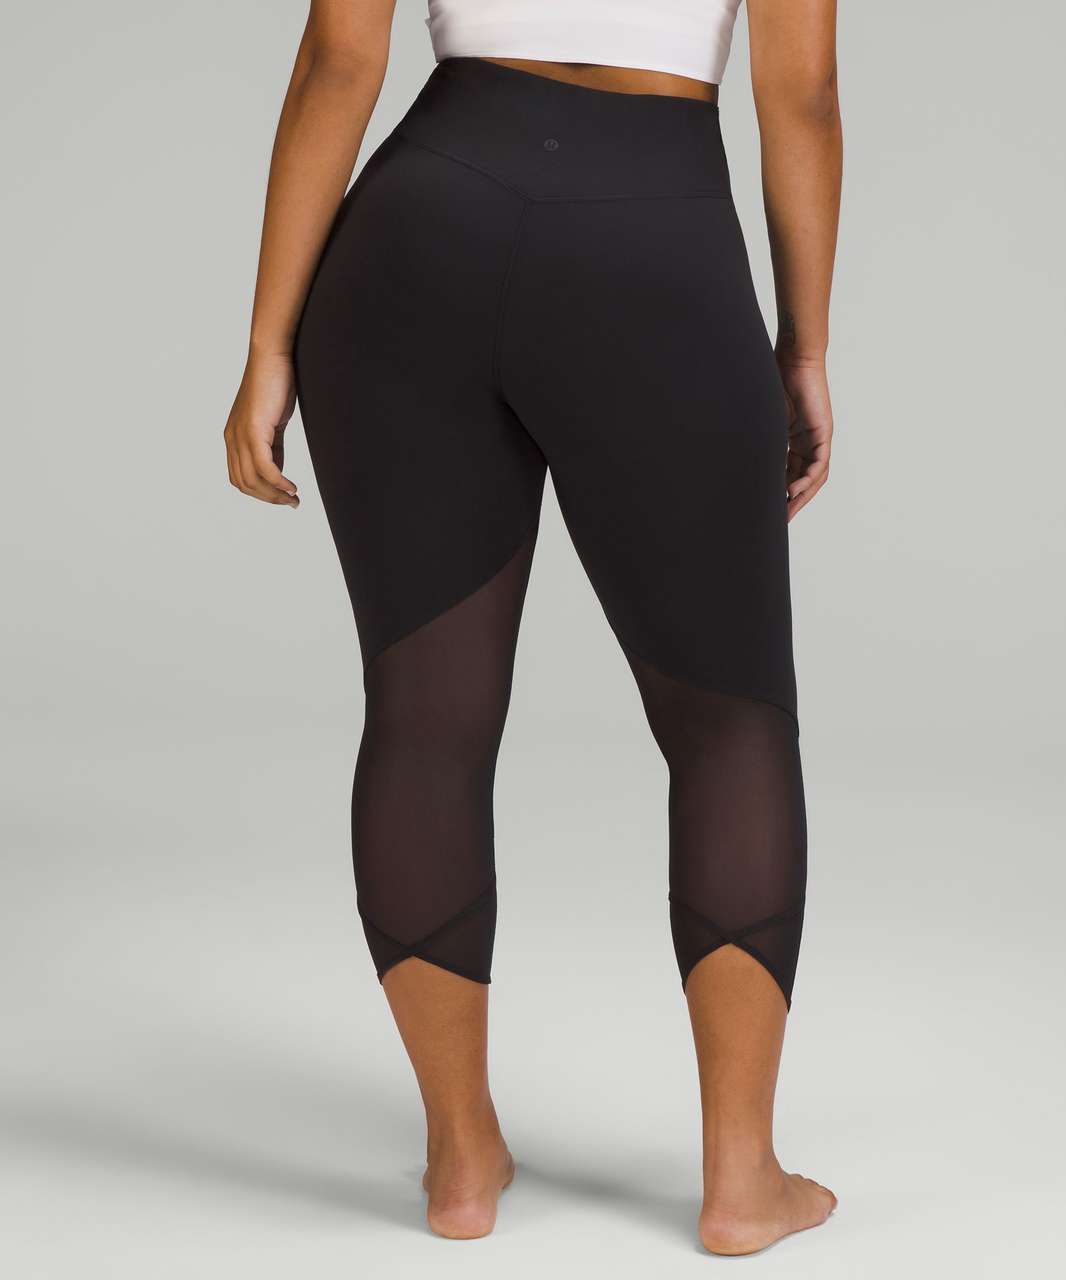 Nulu and Crisscross Mesh Stirrup Tight, detailed review : r/lululemon